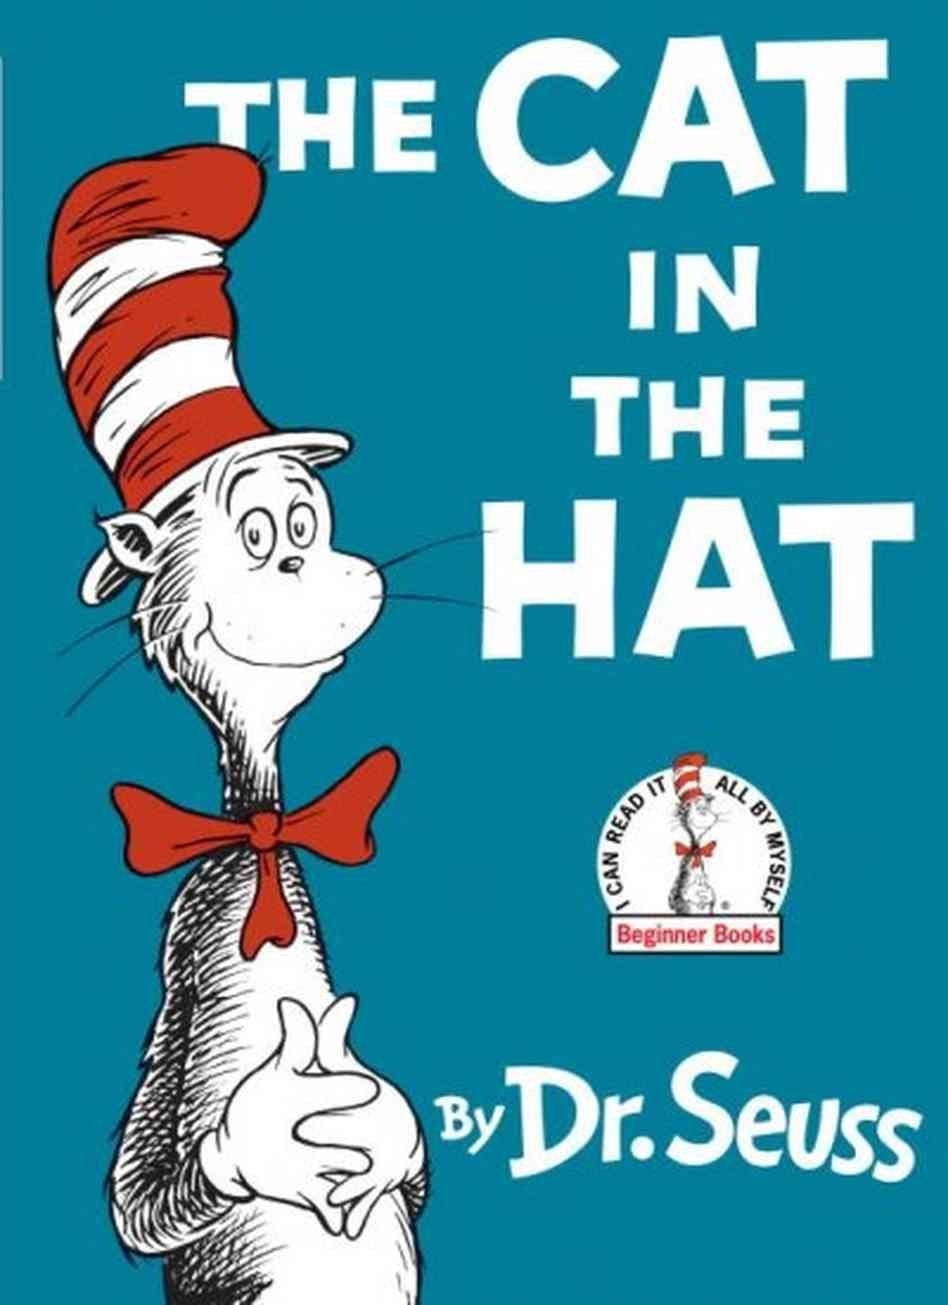 <em>The Cat in the Hat</em> by Dr. Seuss